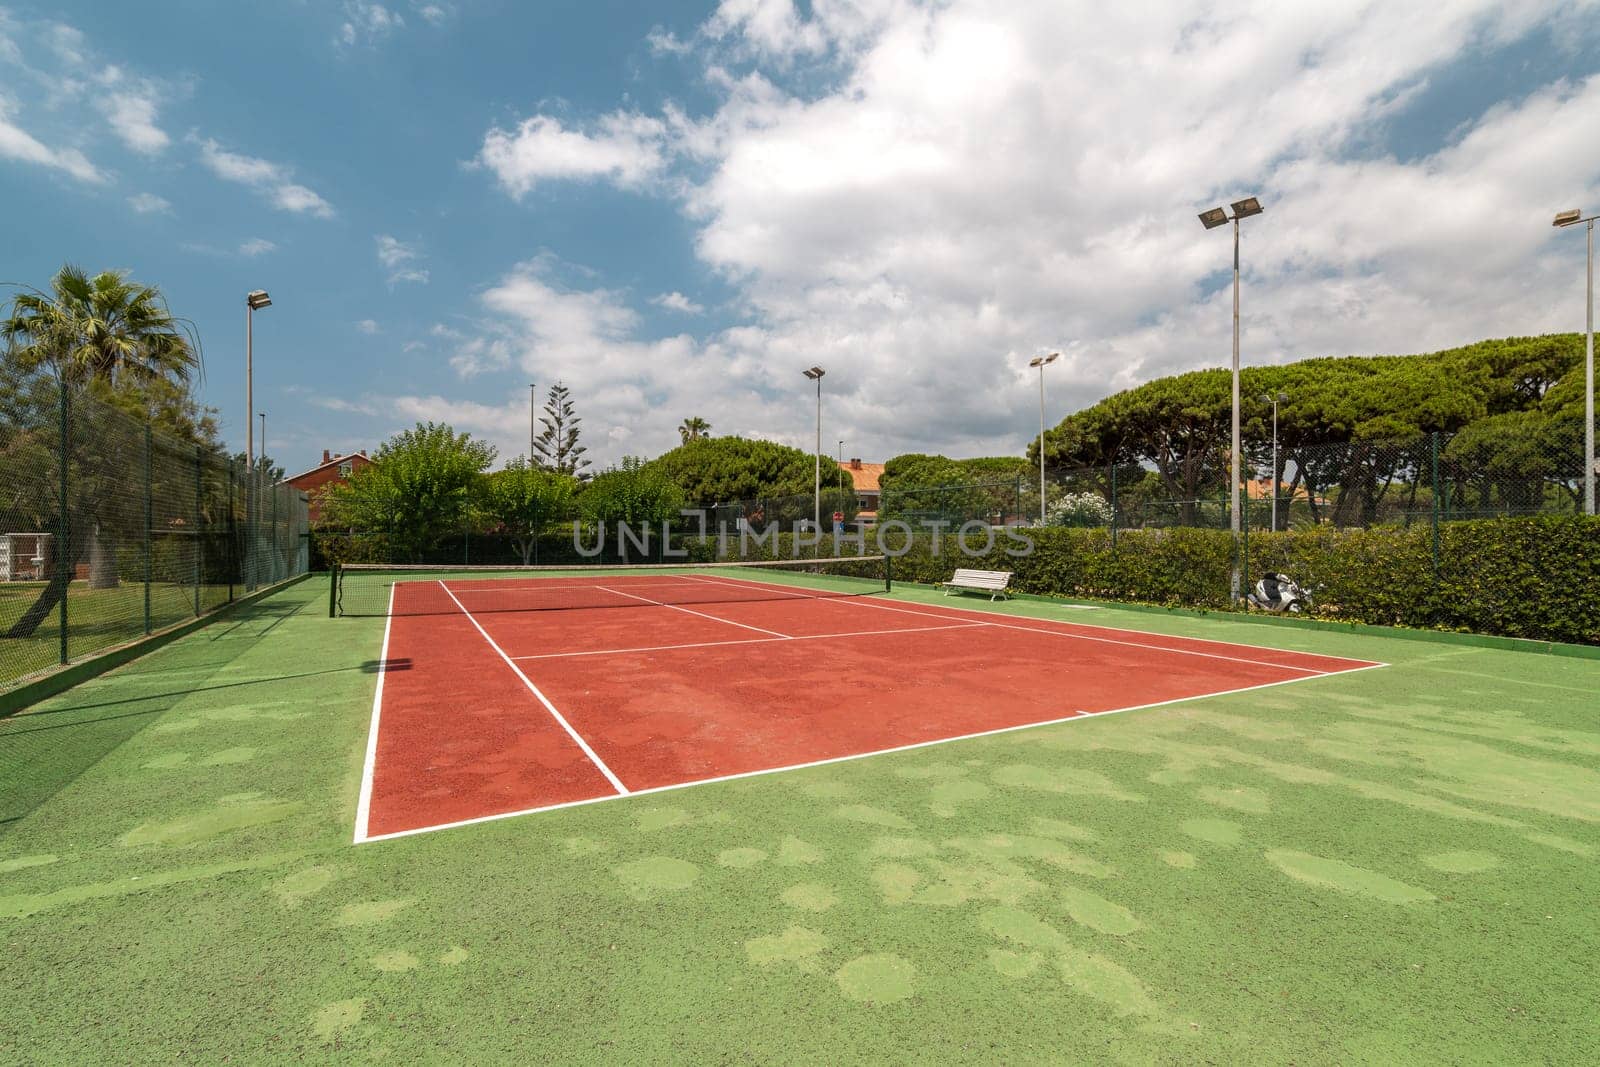 Vibrant outdoor tennis court with a striking red surface, nestled amidst lush greenery.